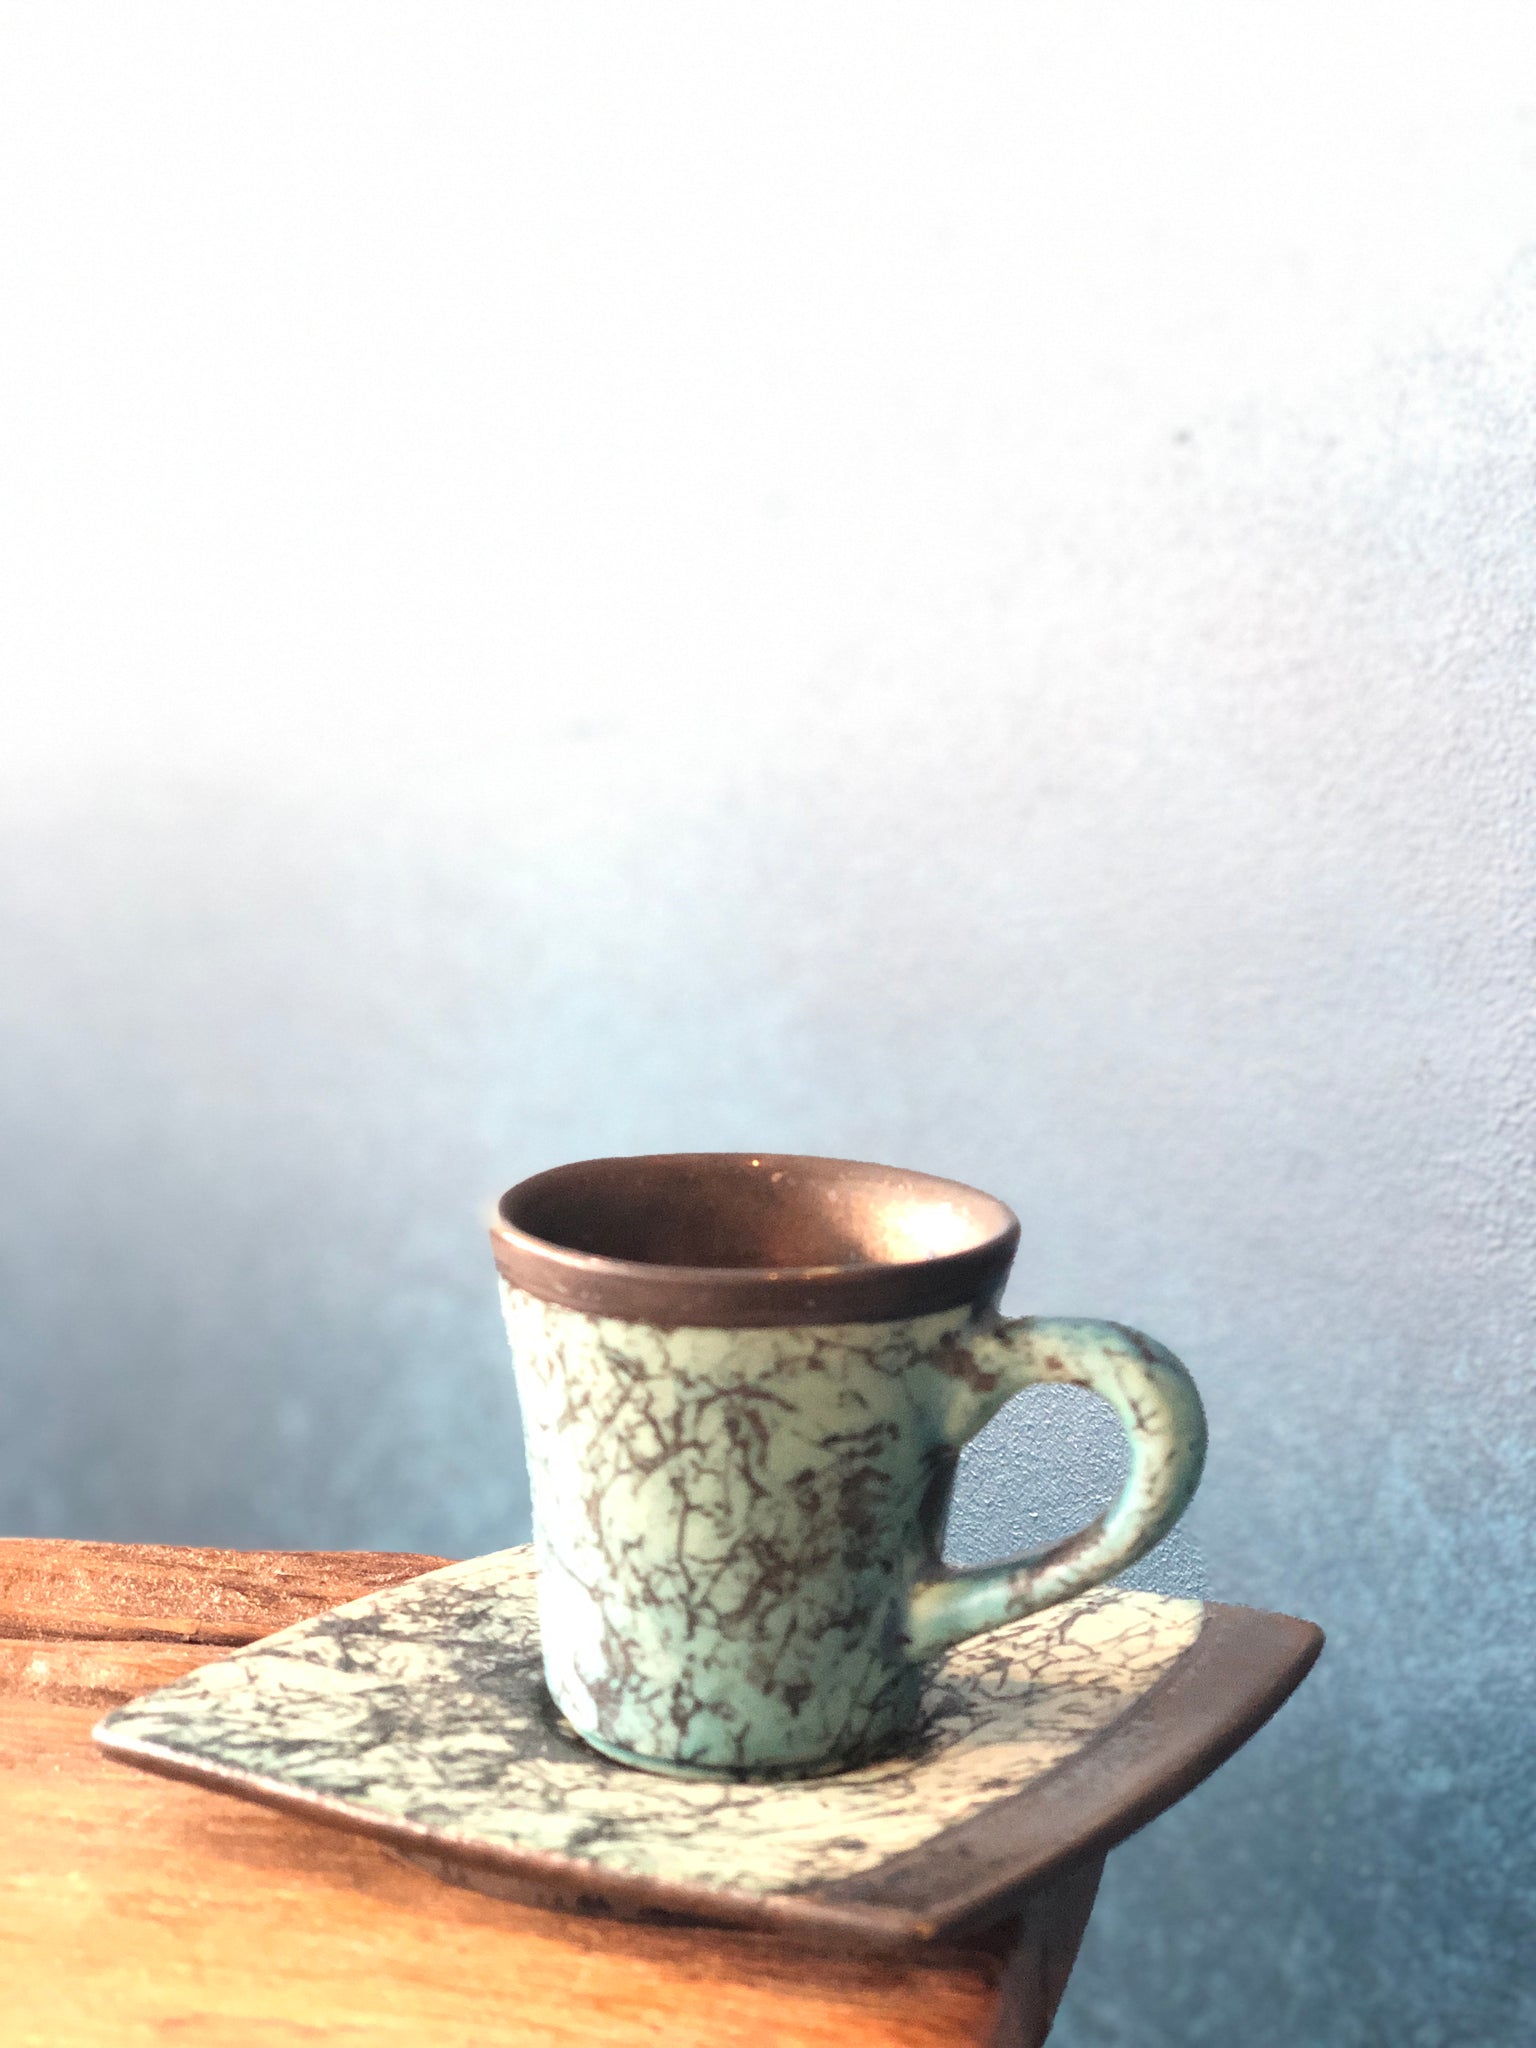 Espresso Cup with Saucer, Unique Style, Rustic Rim Inside, Handmade